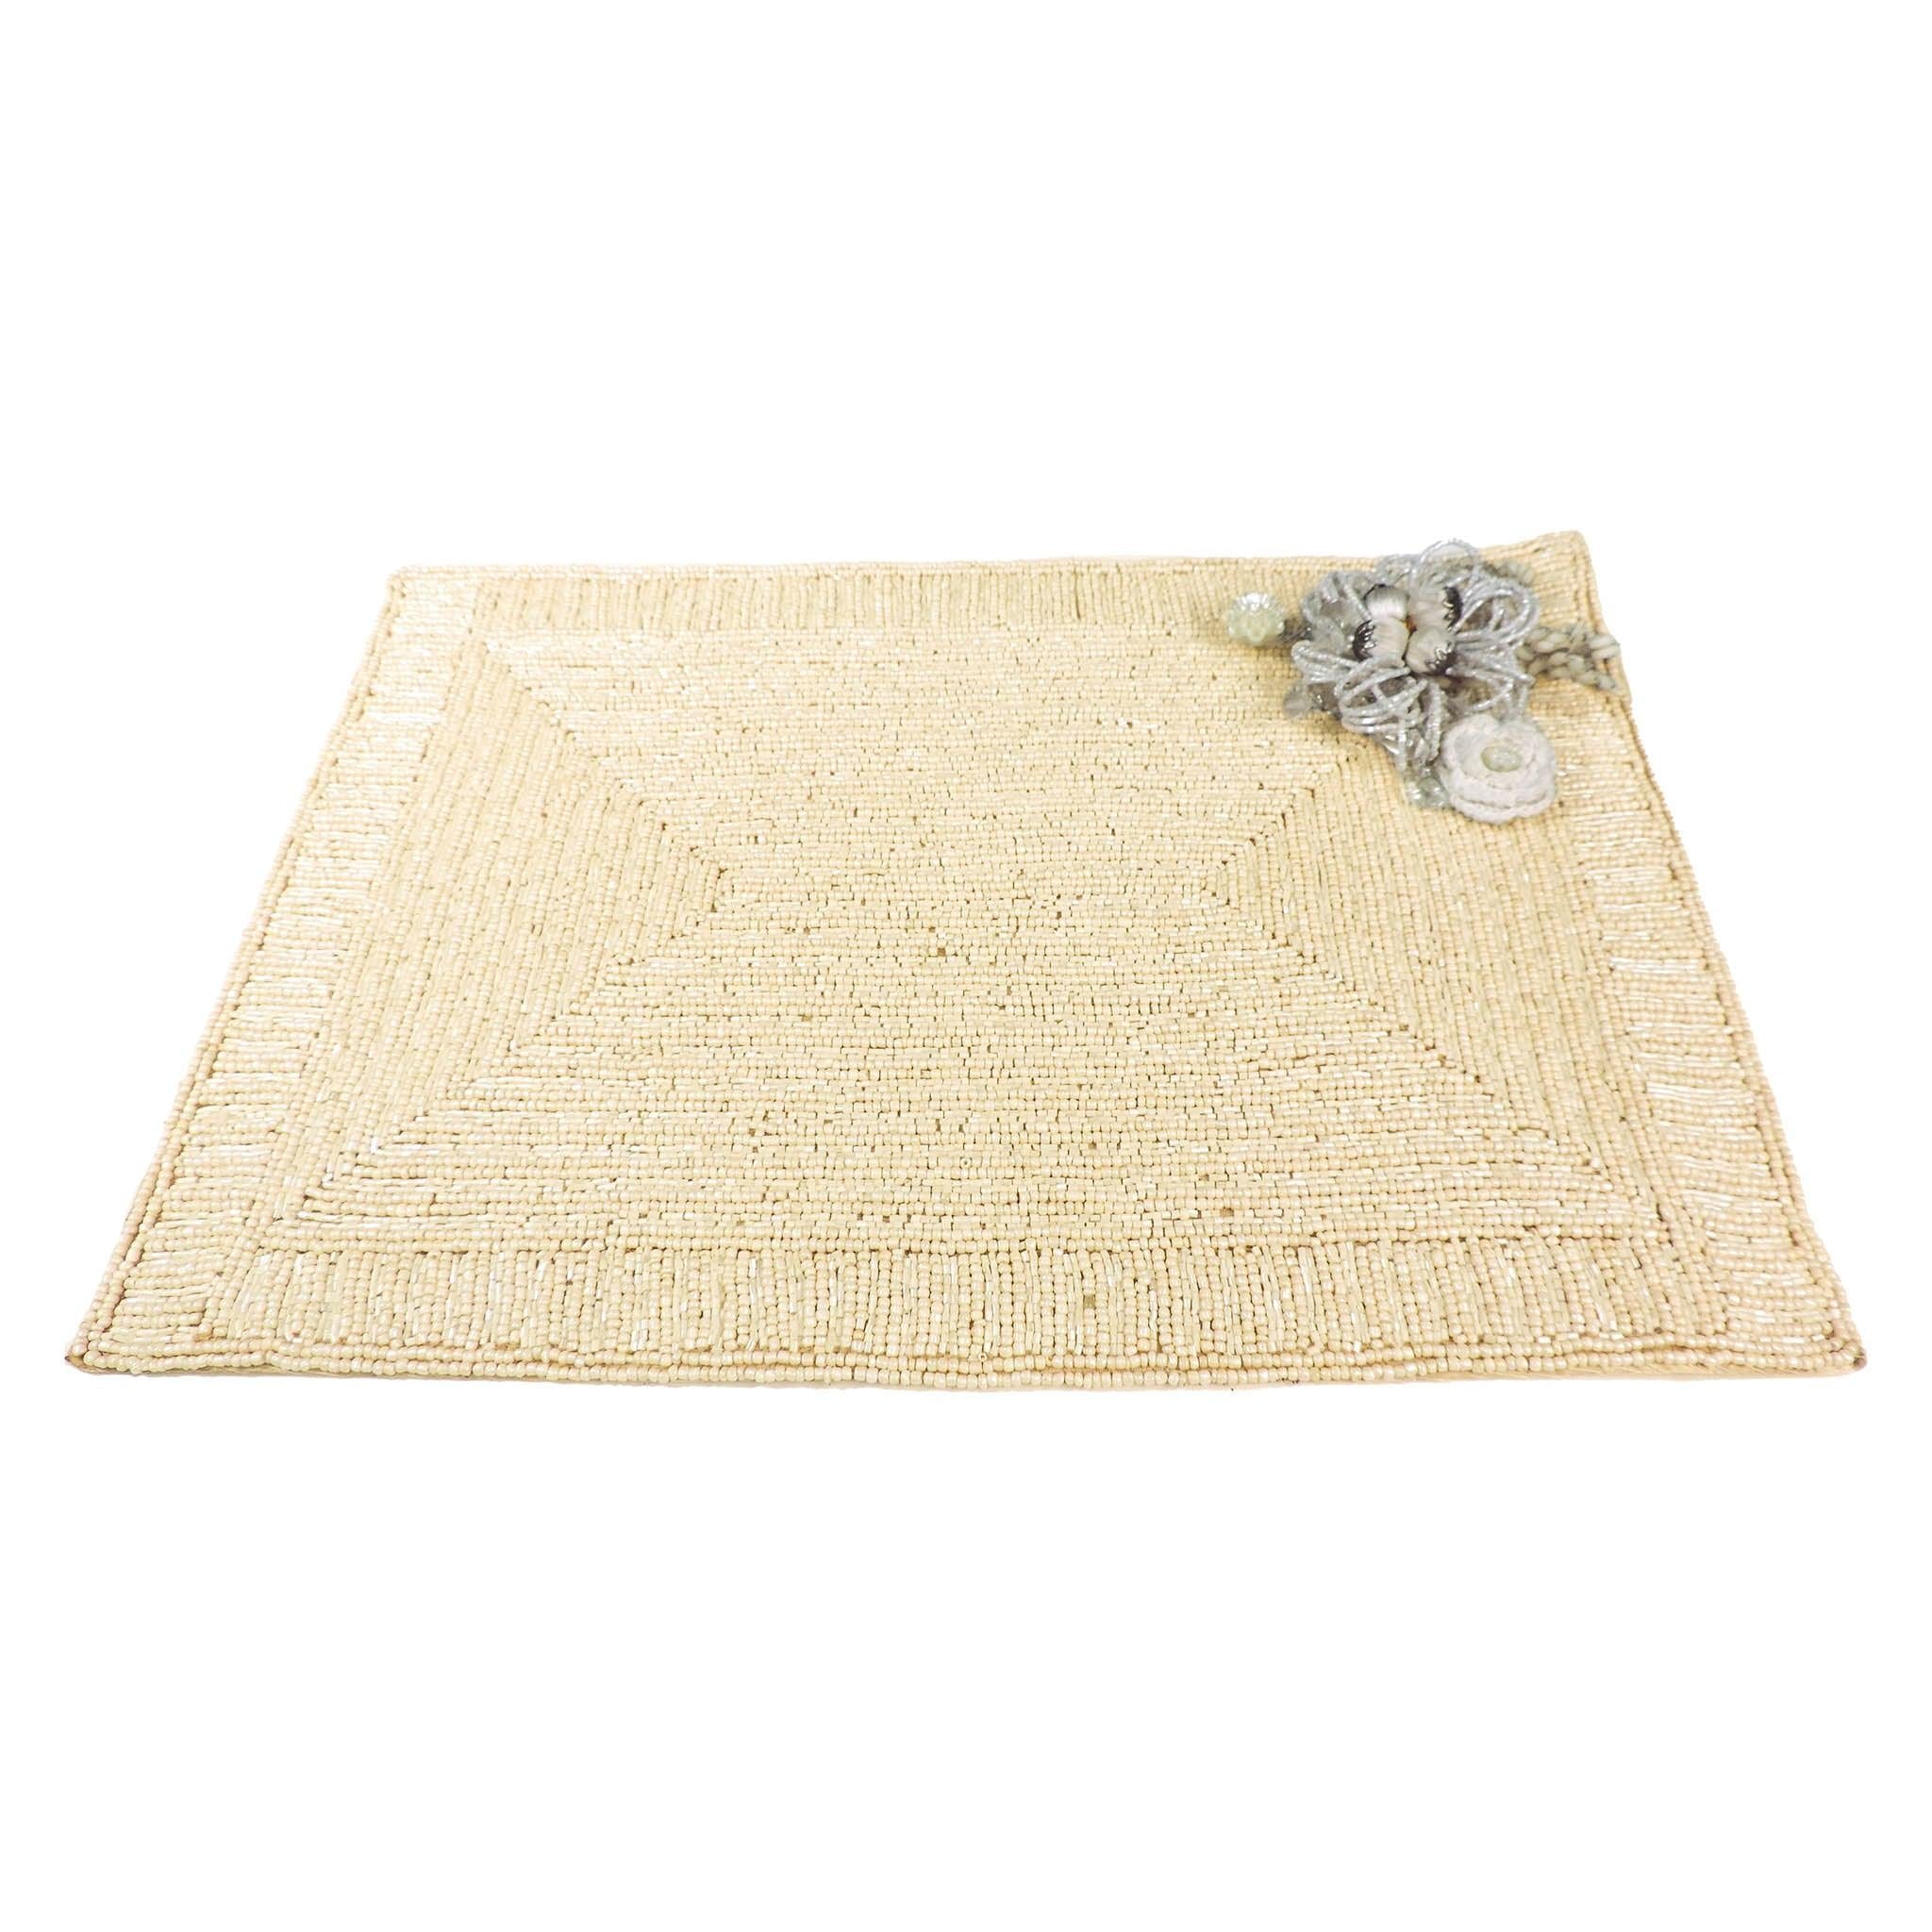 Glass Bead Embroidered Flower Placemat<br>Color: Cream<br>Set of 2/4<br>Size: 12"x18"